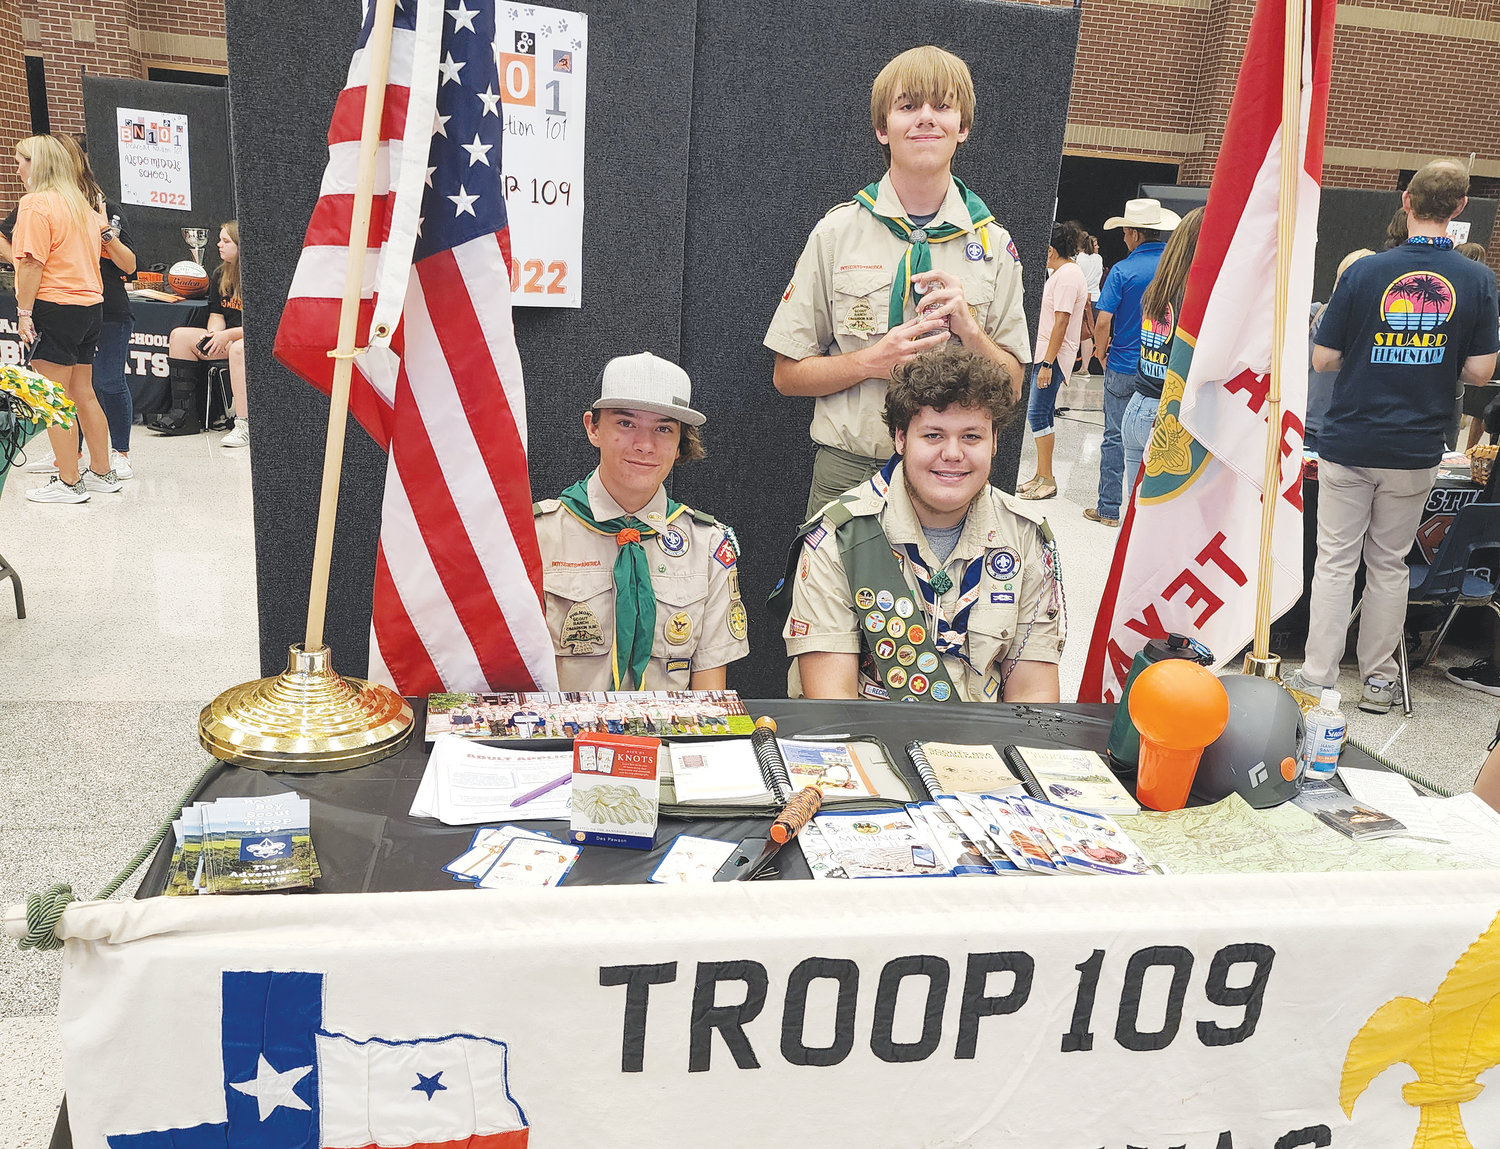 Boy Scout Troop 109 (from left) Ethan Price, Preston Galle, (standing) Ethan Hogearth.